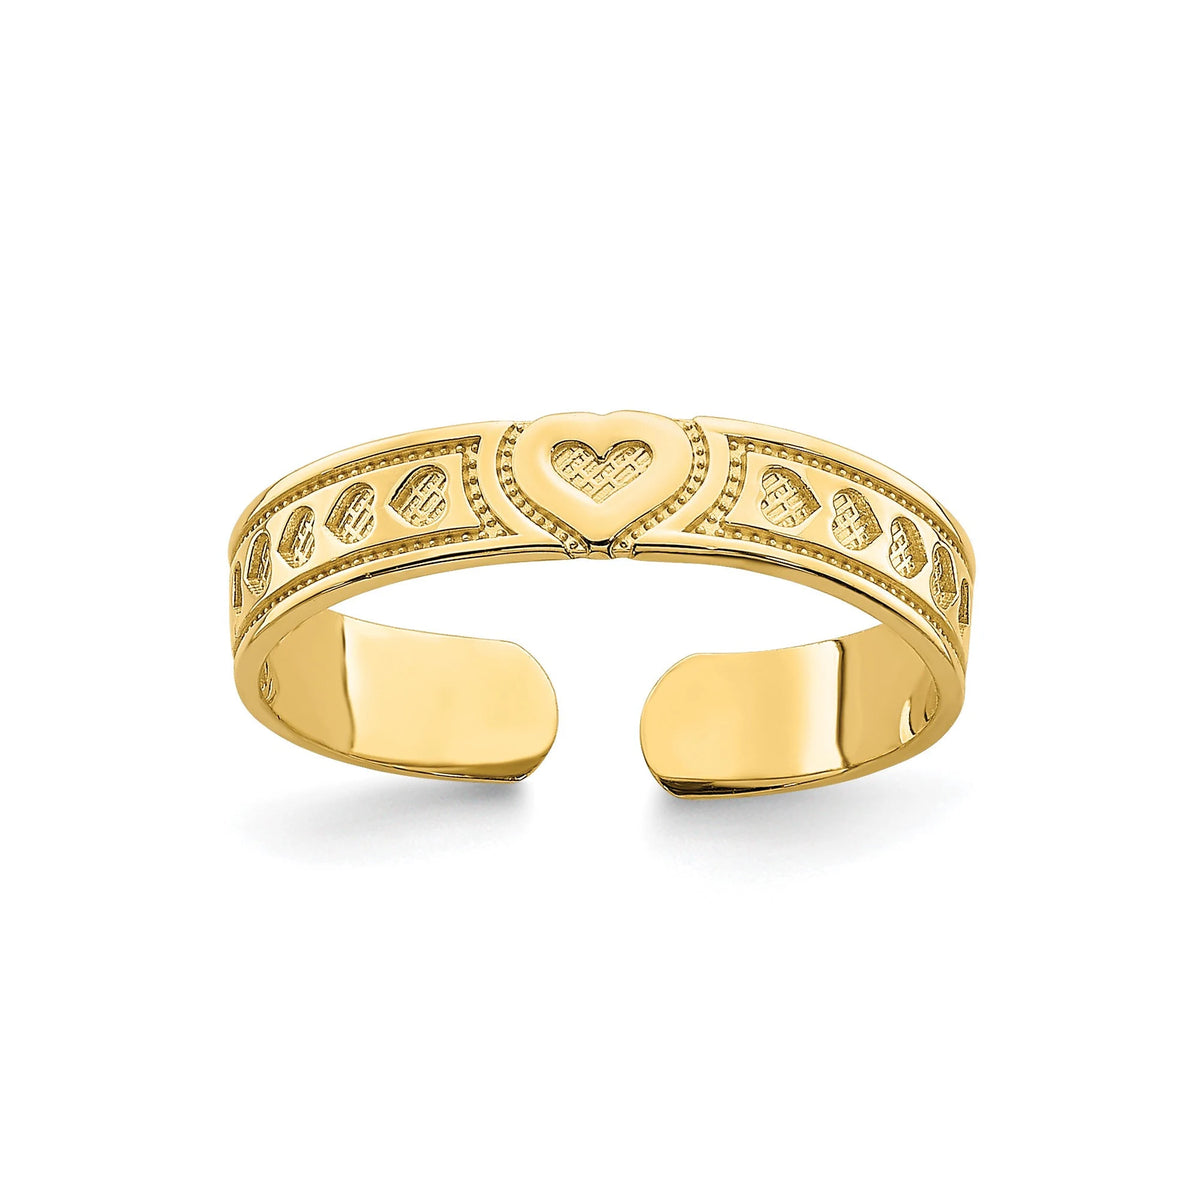 14k Yellow Gold Engraved Heart Adjustable Toe Ring  Band (Not Plated or Filled) Genuine 14k Yellow Gold - Gift Box Included - Made in USA